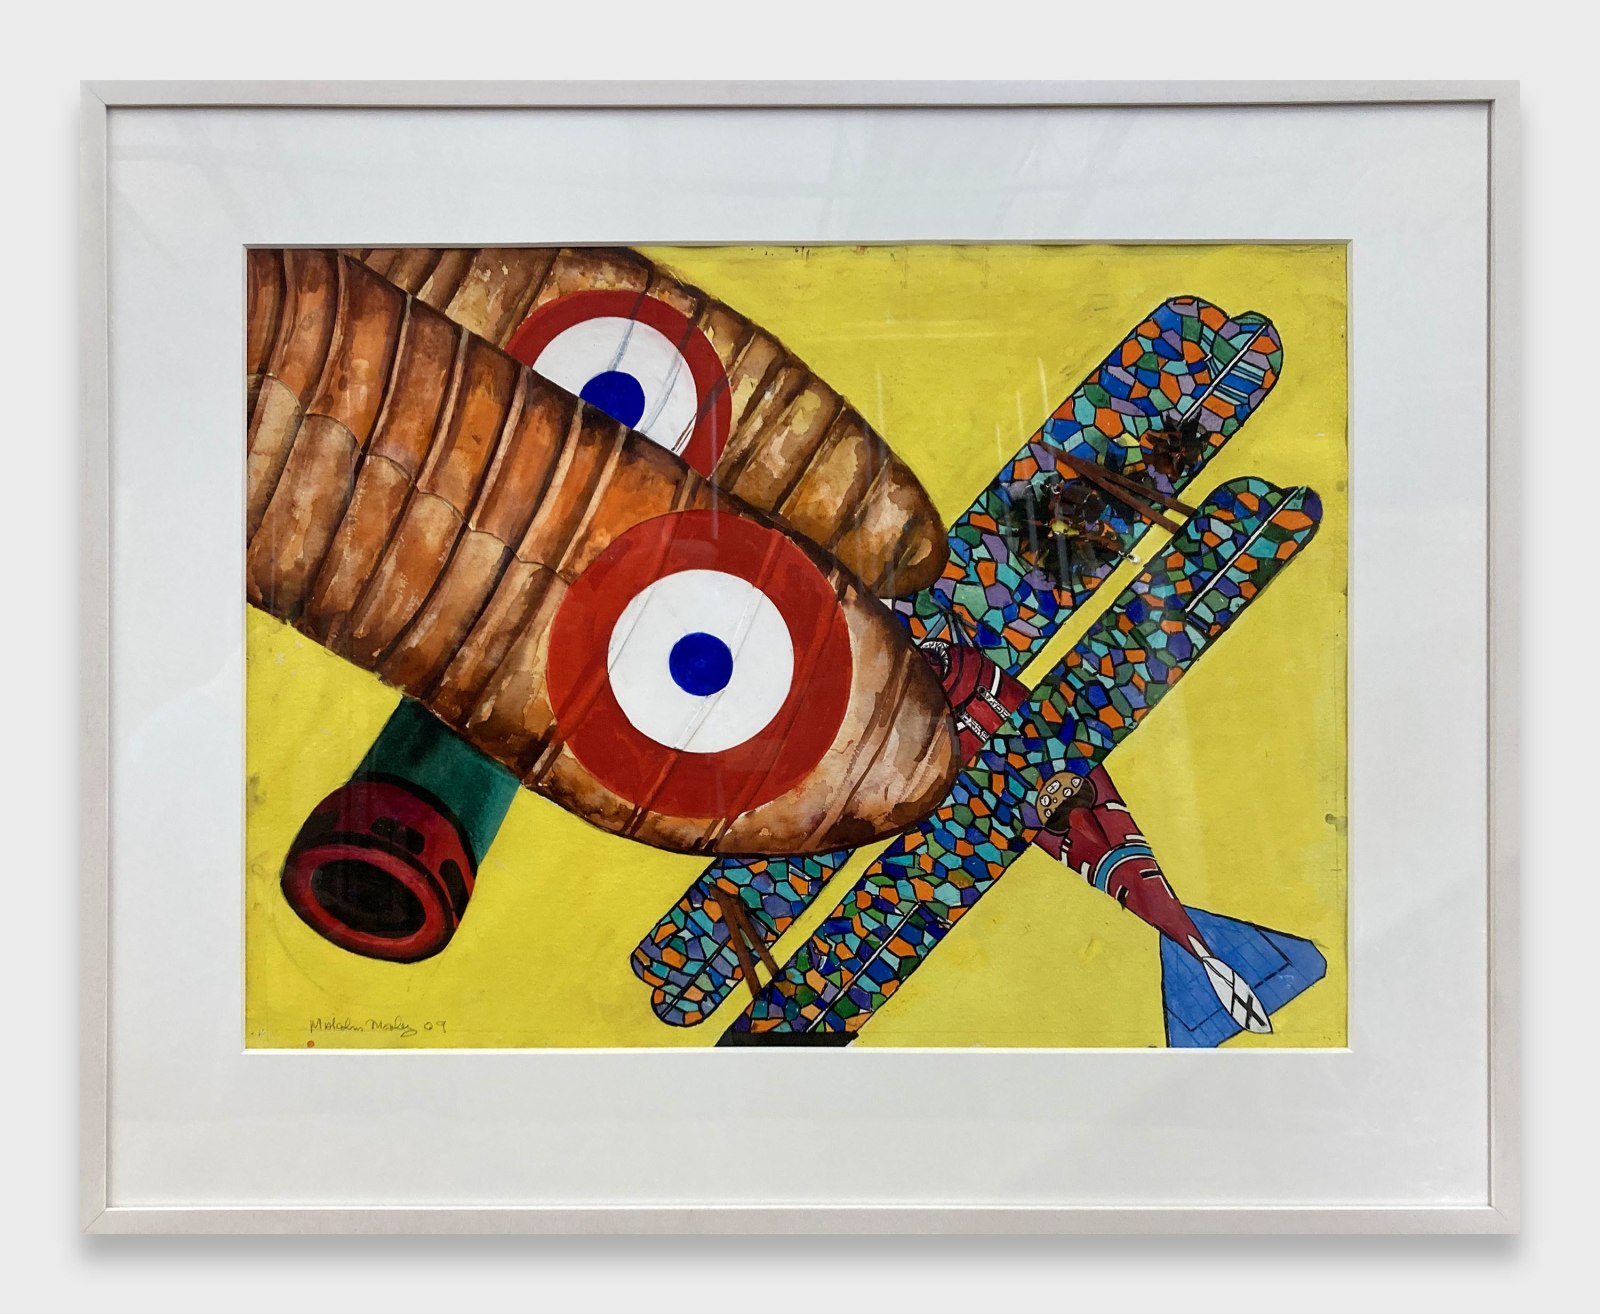 Malcolm Morley, Aero-naughty-cal Maneuver, 2009, Watercolor on paper with papier colle, 22 1/8 x 30 1/4 inches.